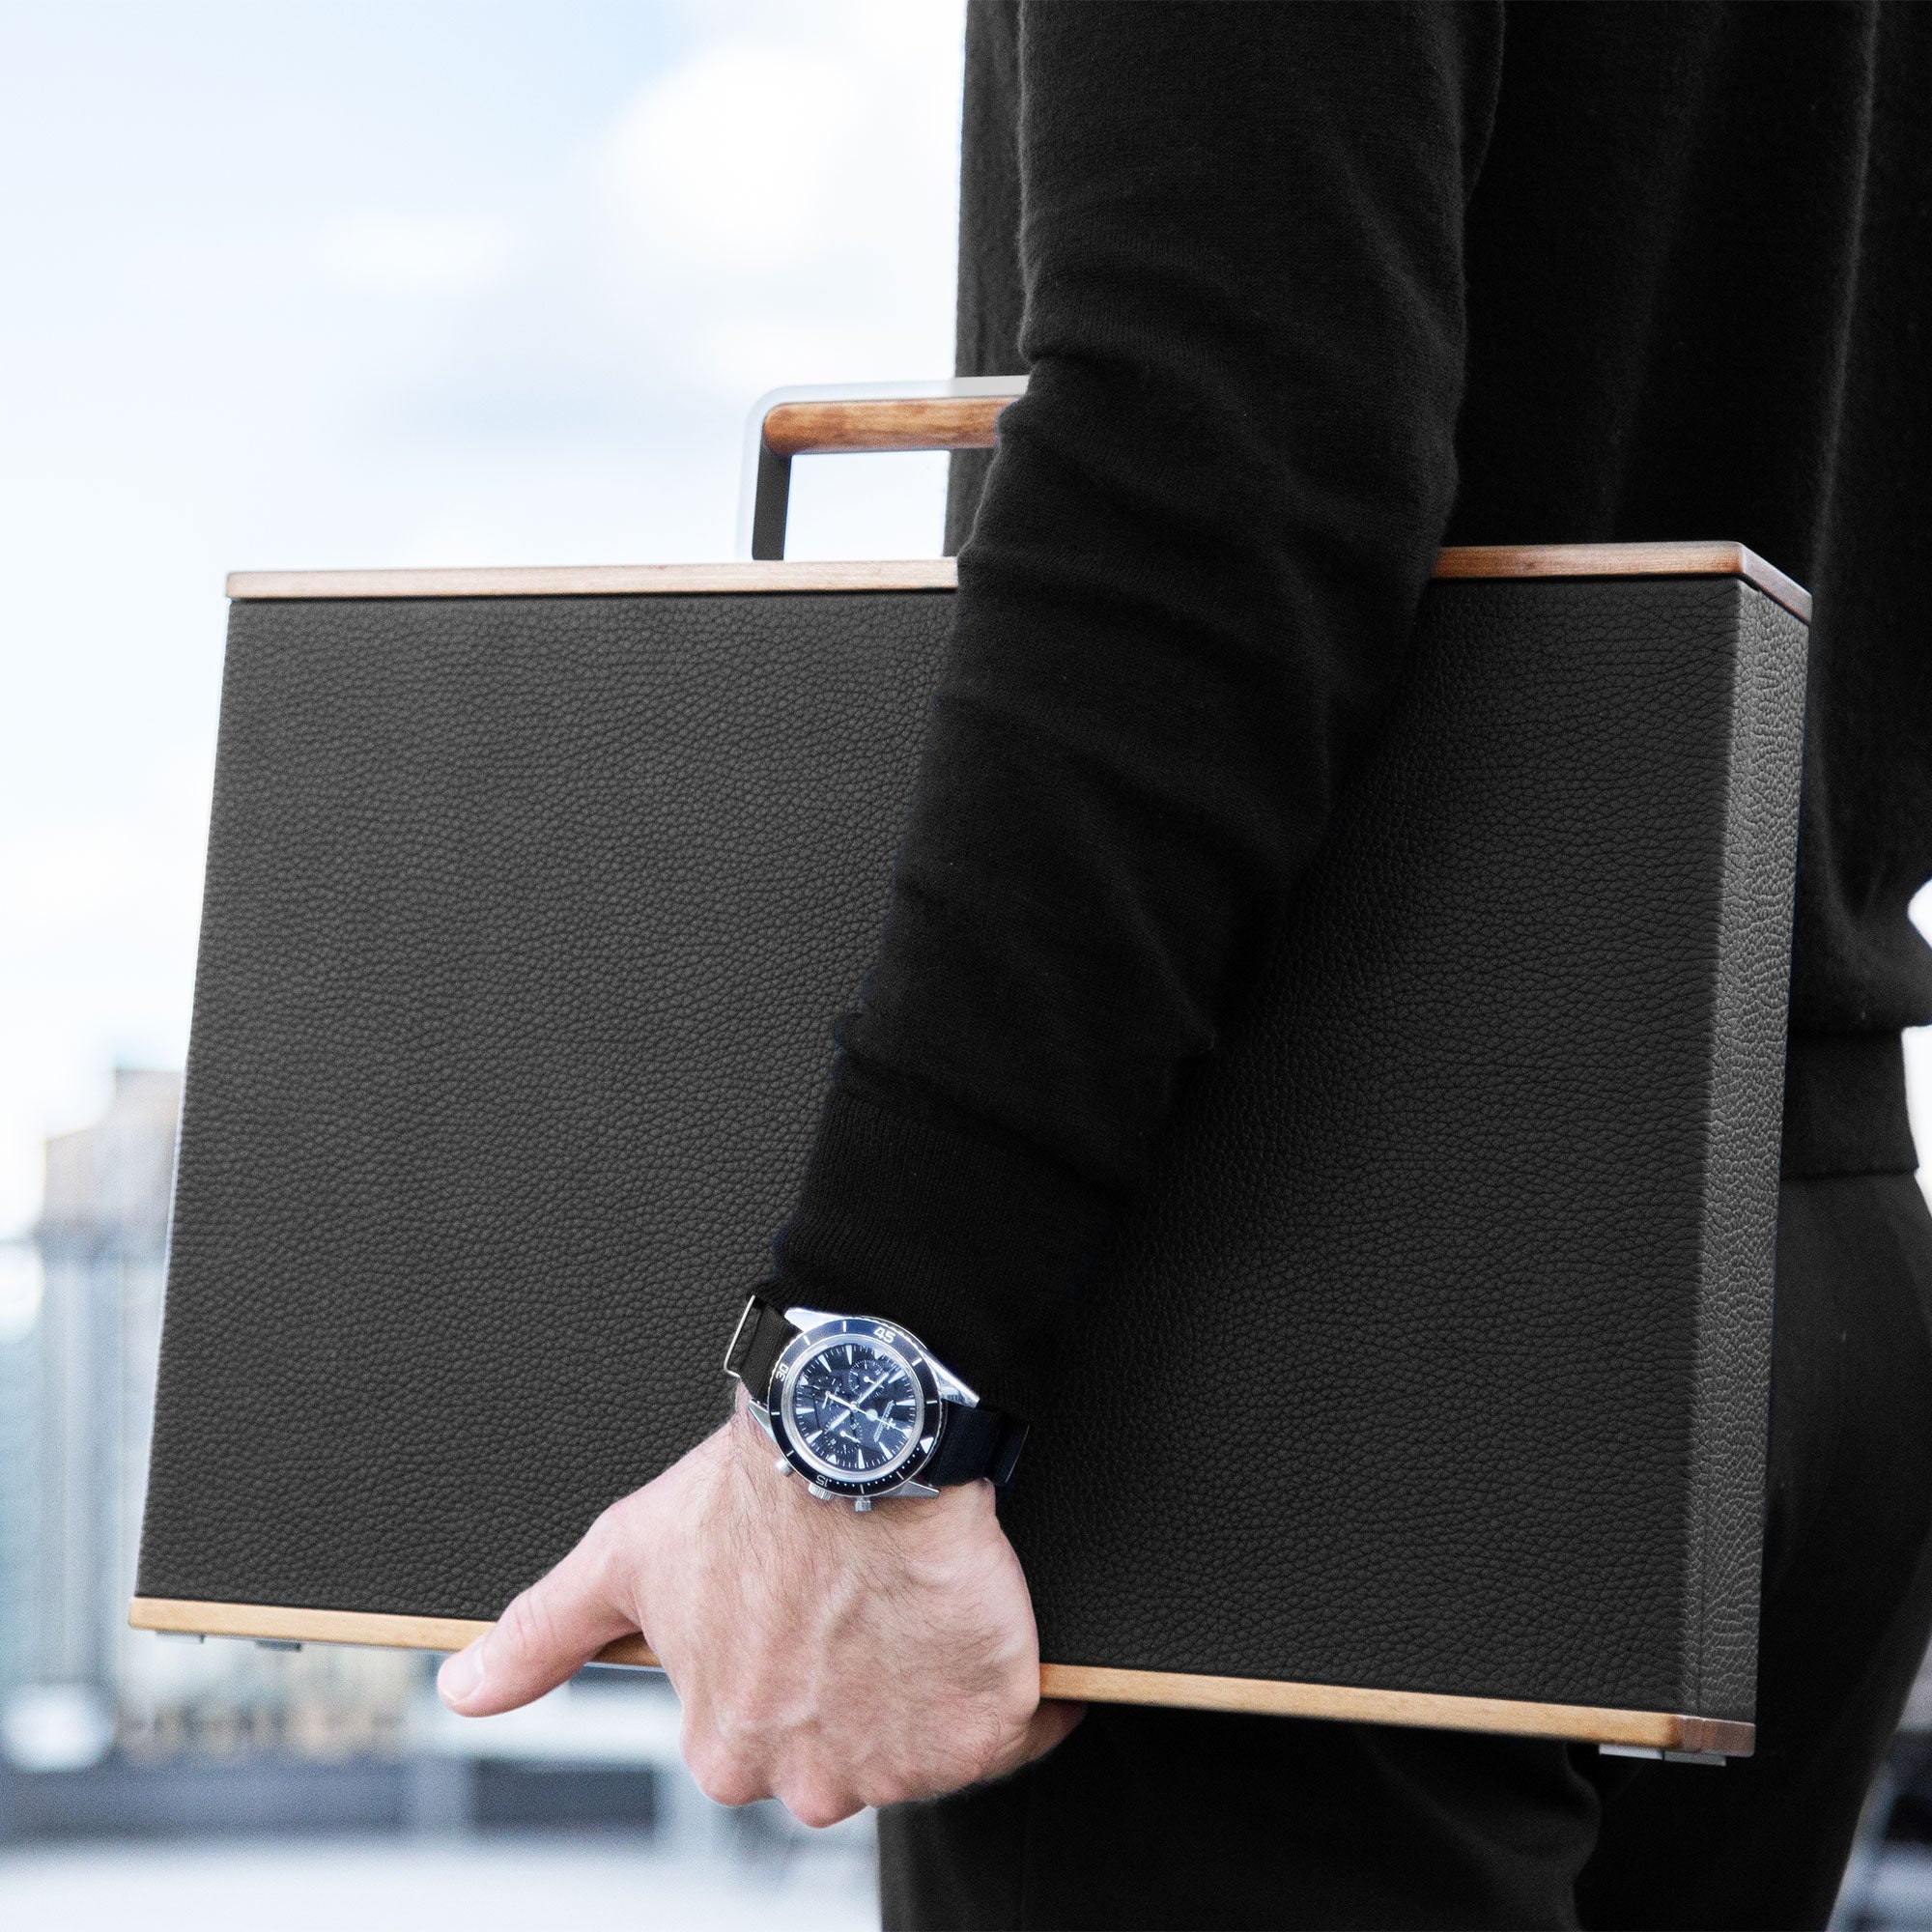 Lifestyle shot of man wearing luxury watch holding Mackenzie Original watch briefcase. Handmade from recycled wood, French leather and carbon fiber and anodized aluminum to display your watch collection